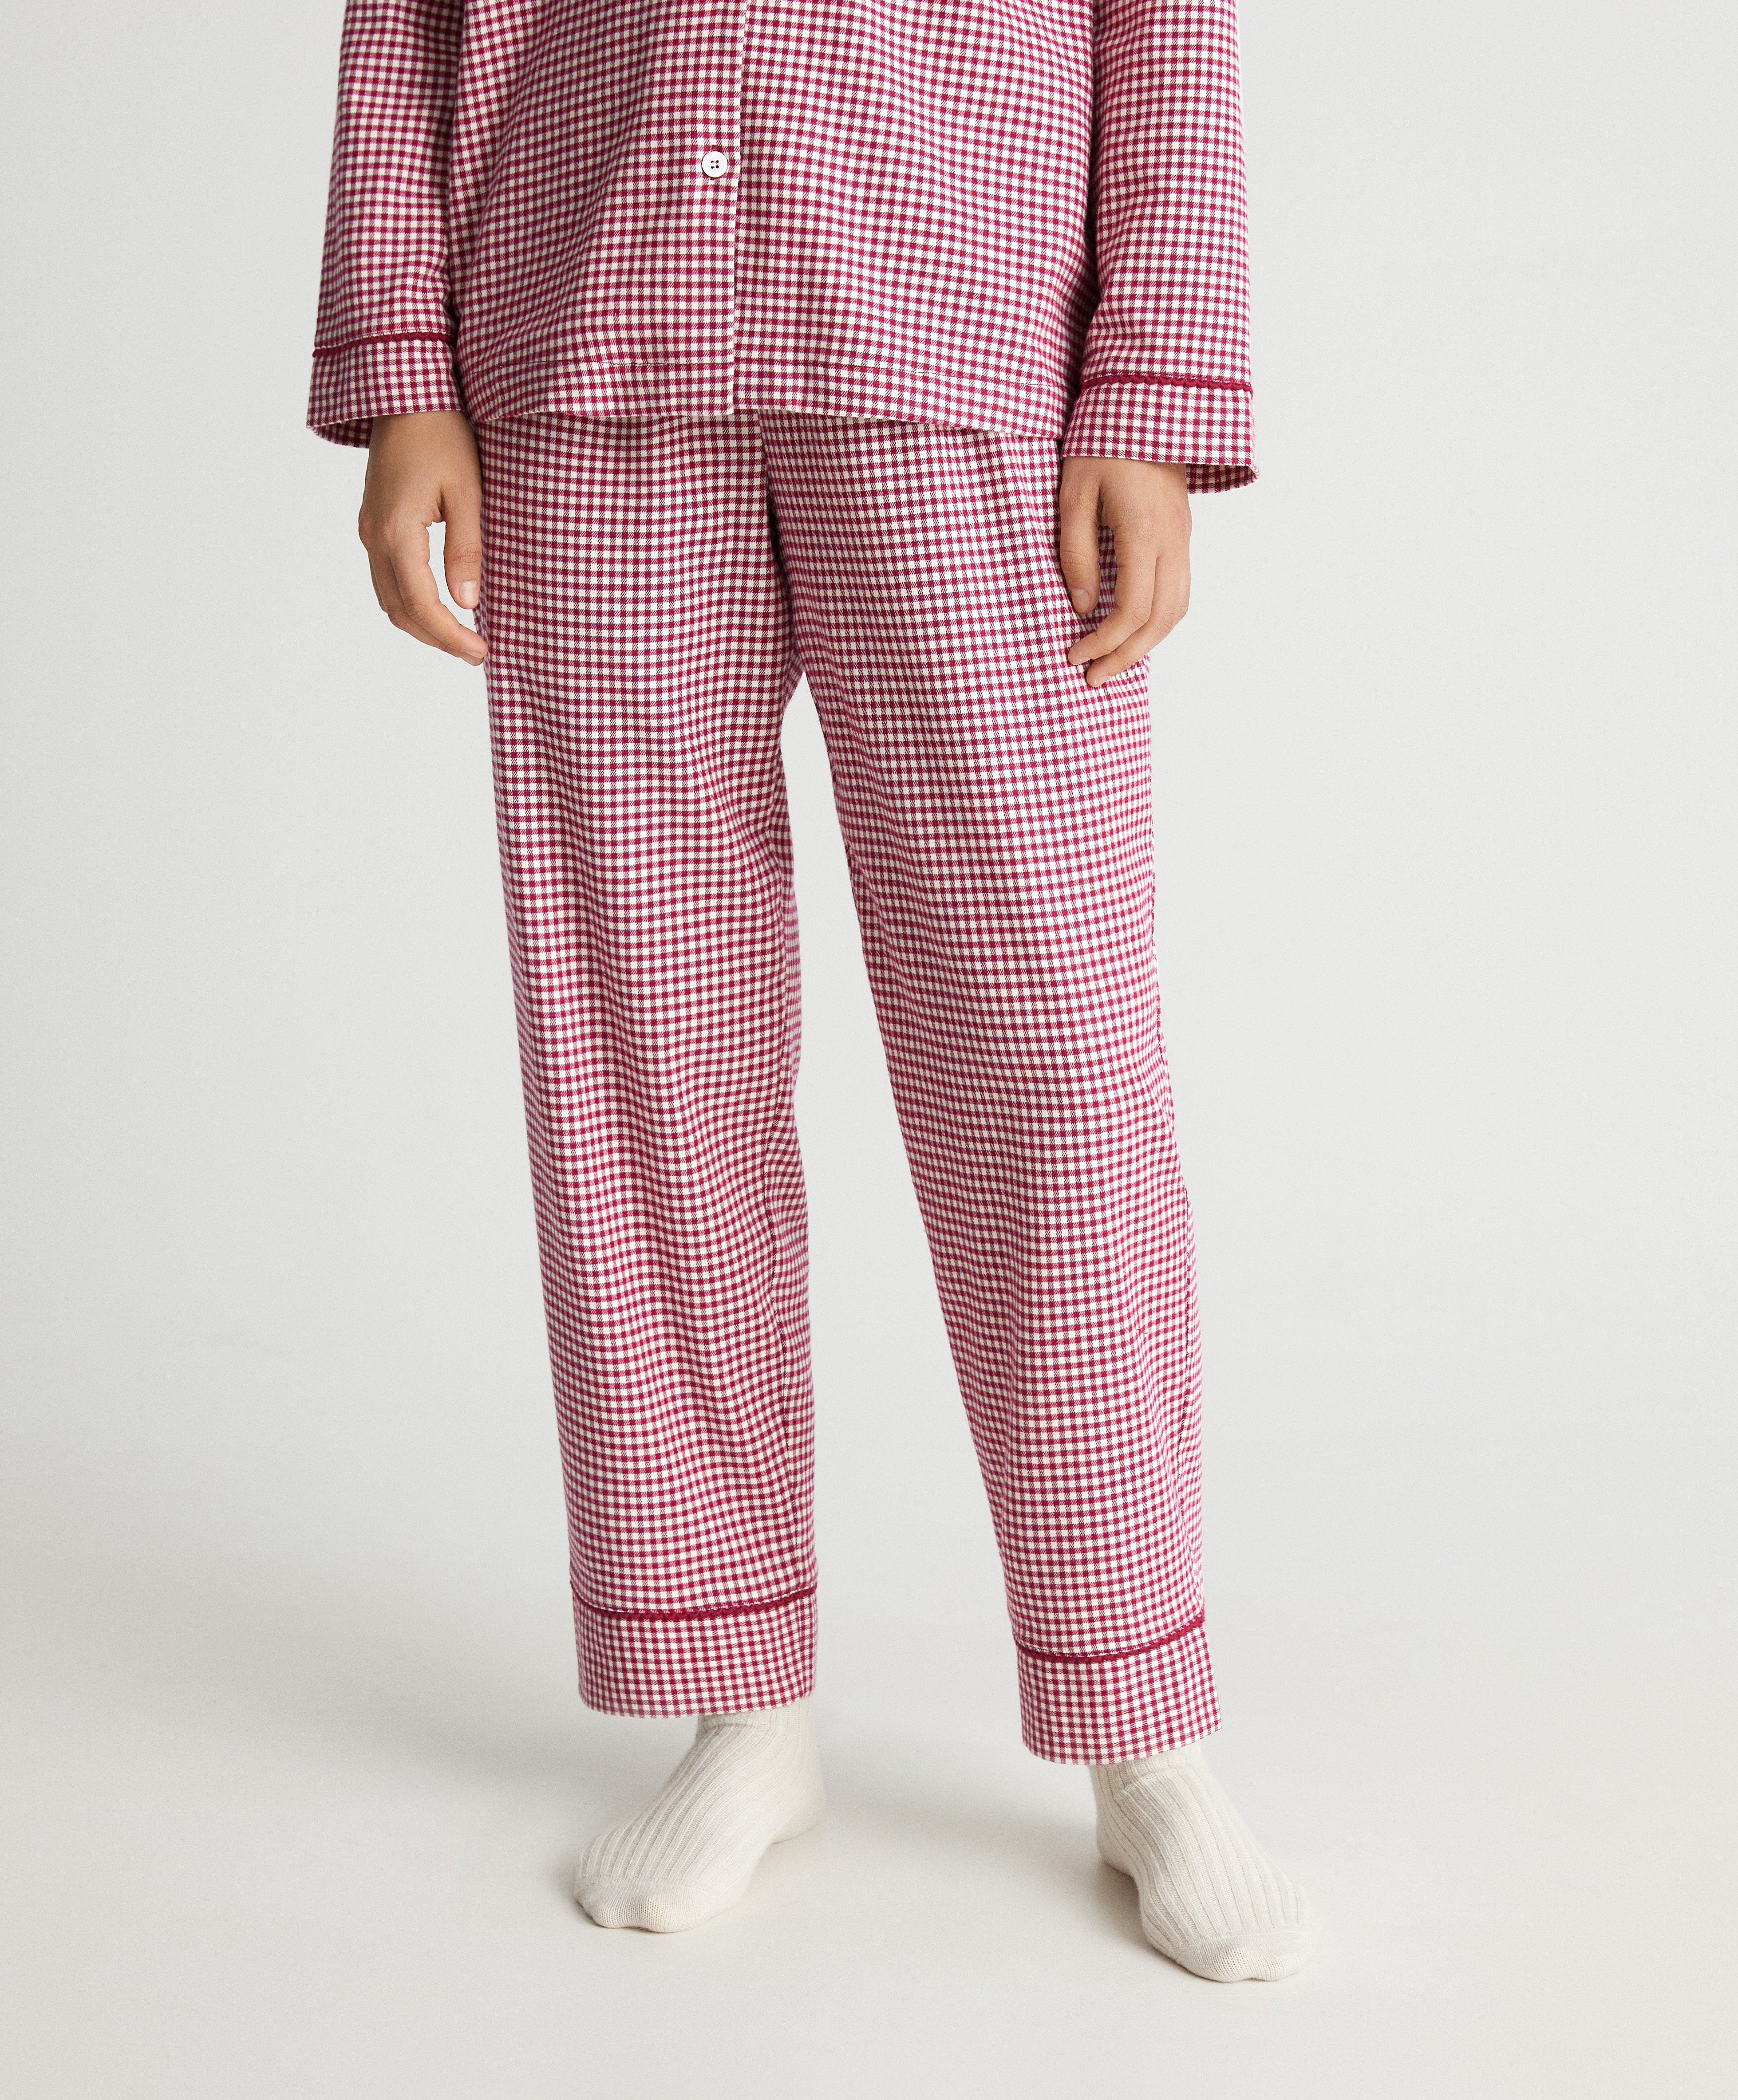 Stretch cotton gingham trousers